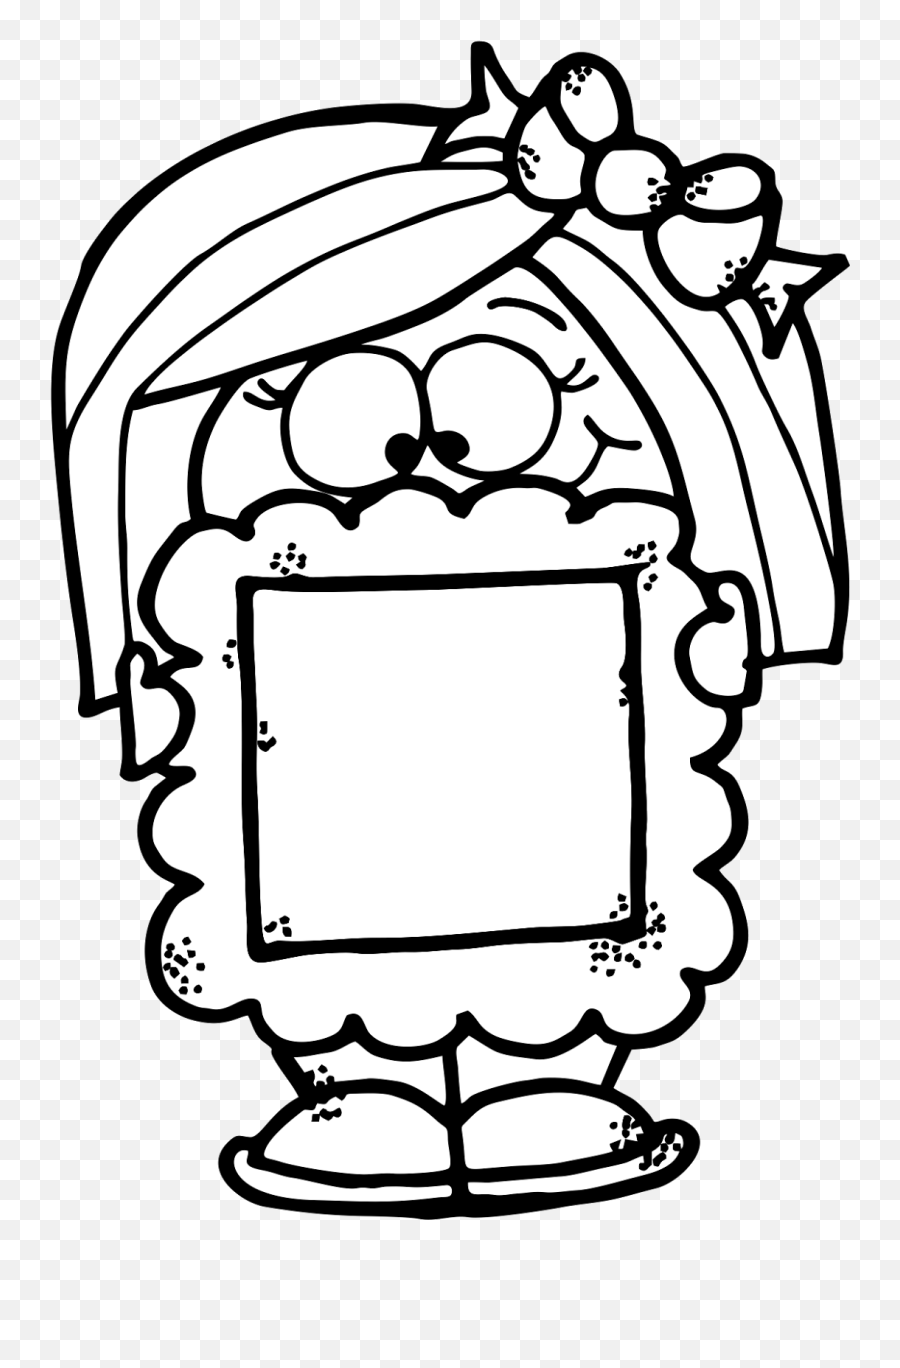 Free - My Family Colouring In Frames Emoji,Family Clipart Black And White